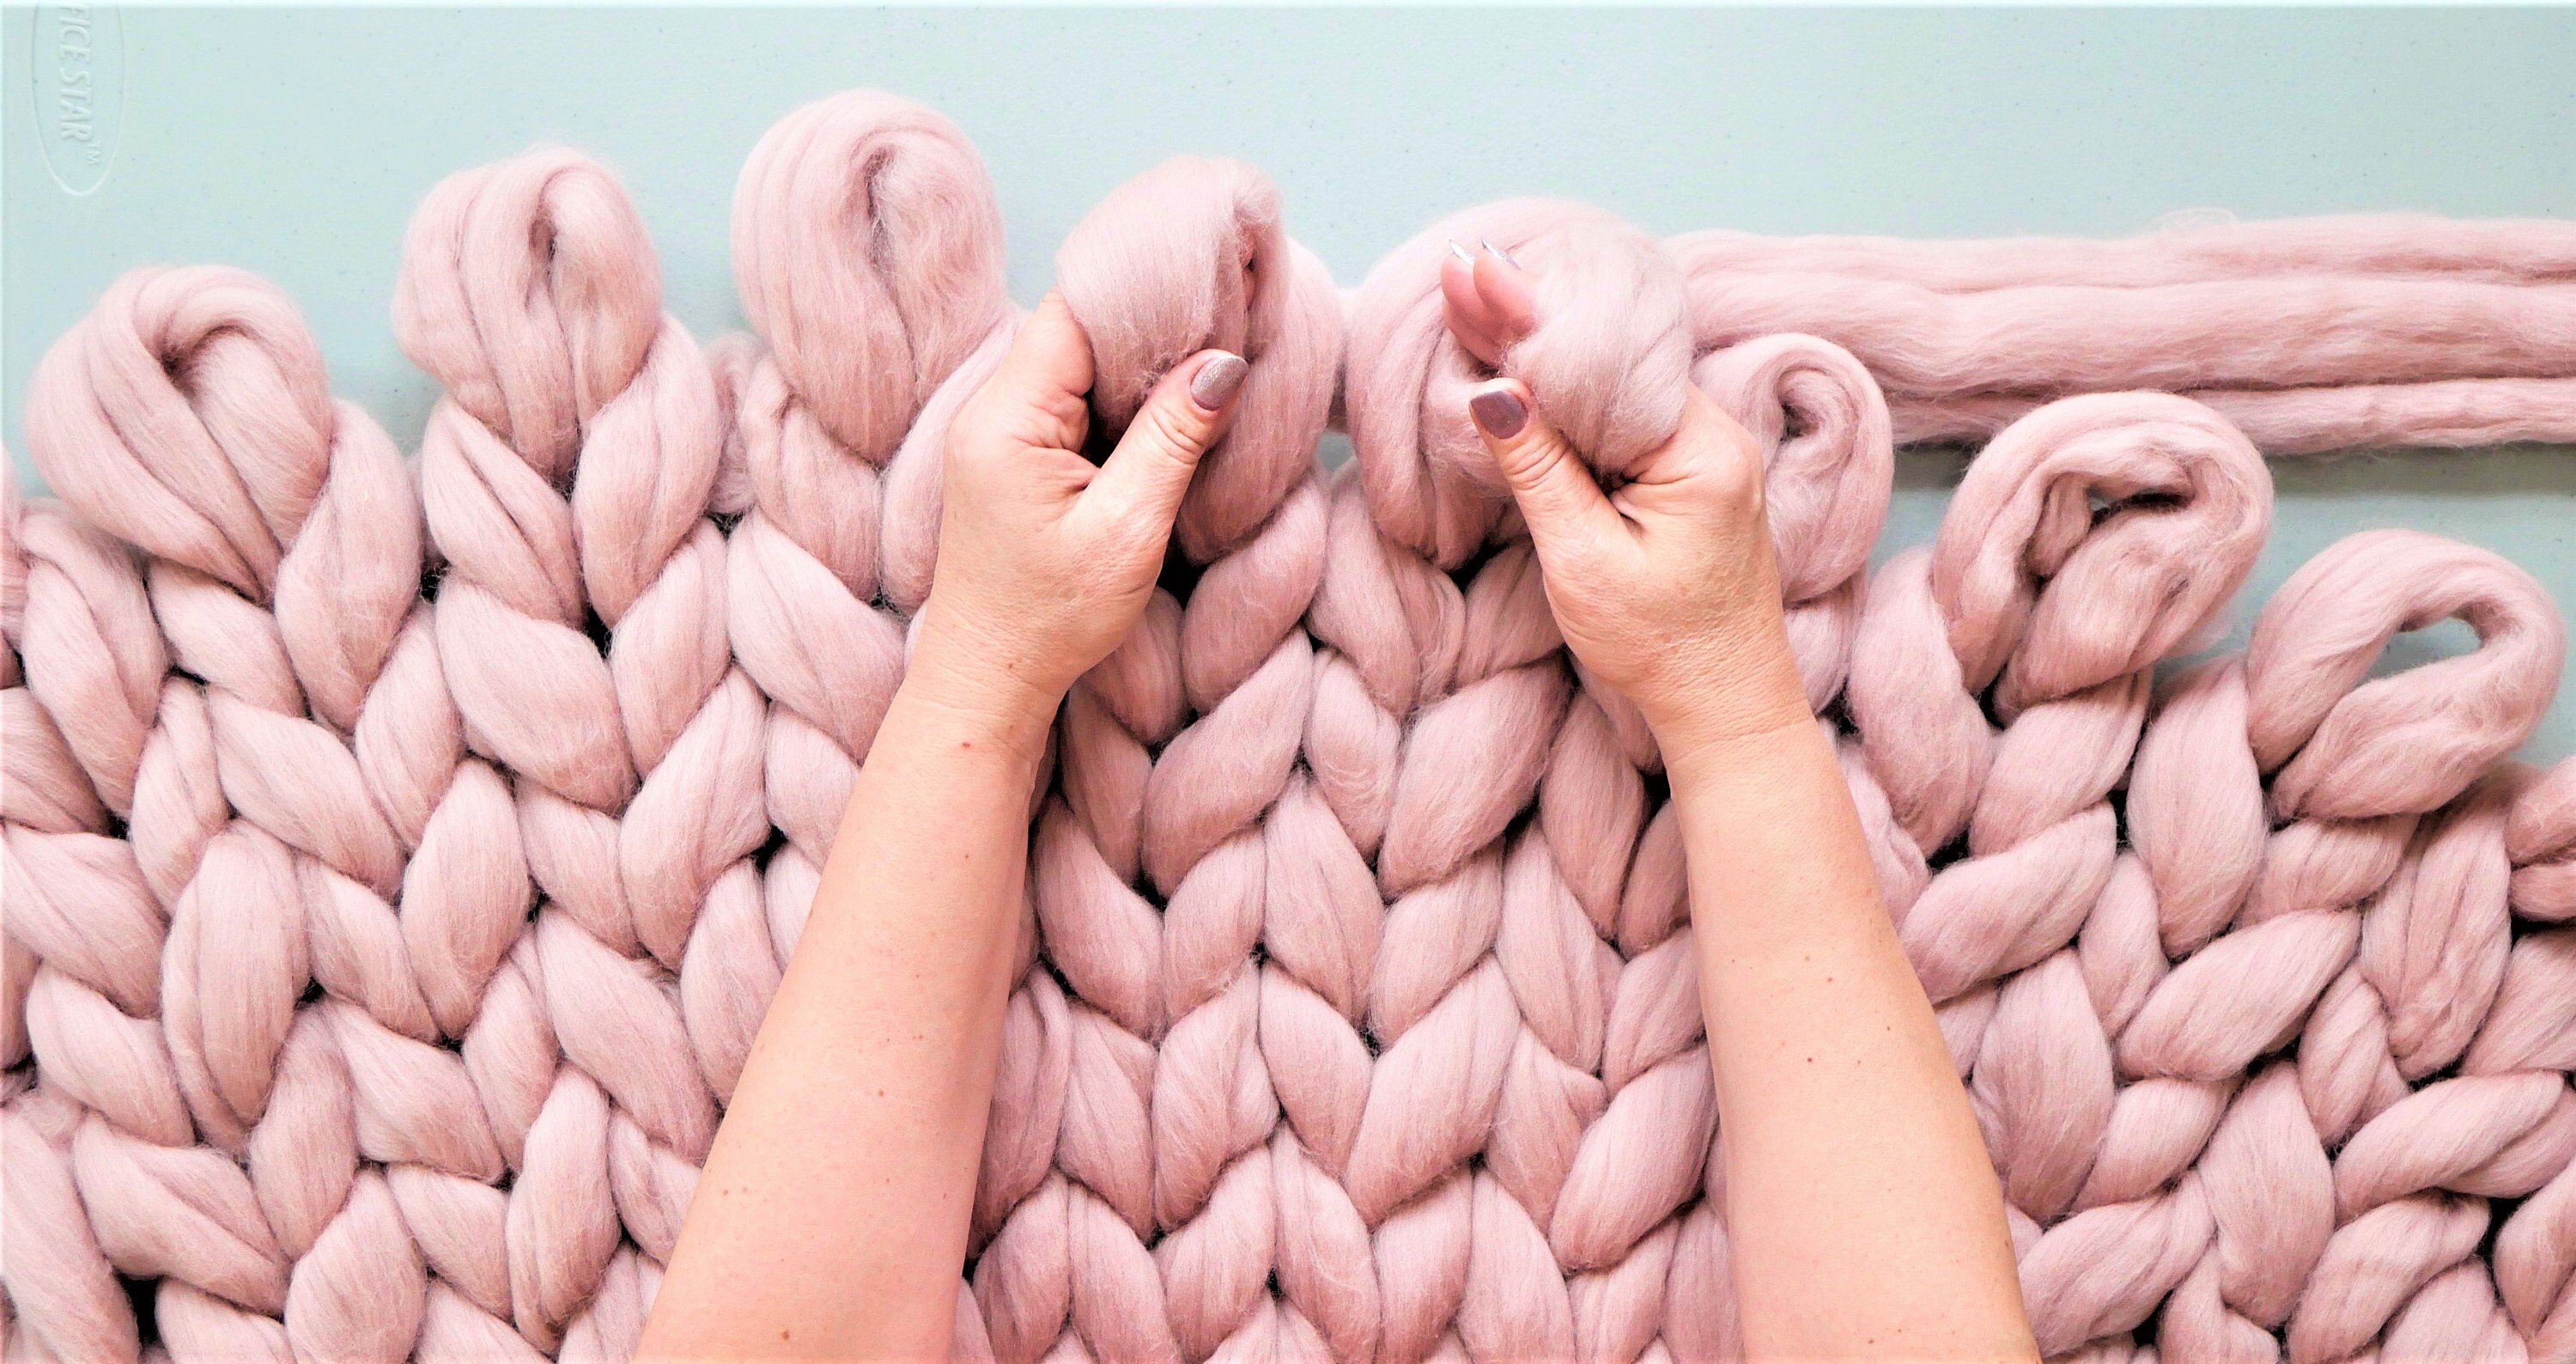 🧶 DIY Easy Chunky Knit Blanket, How to make a Chunky Blanket with hands